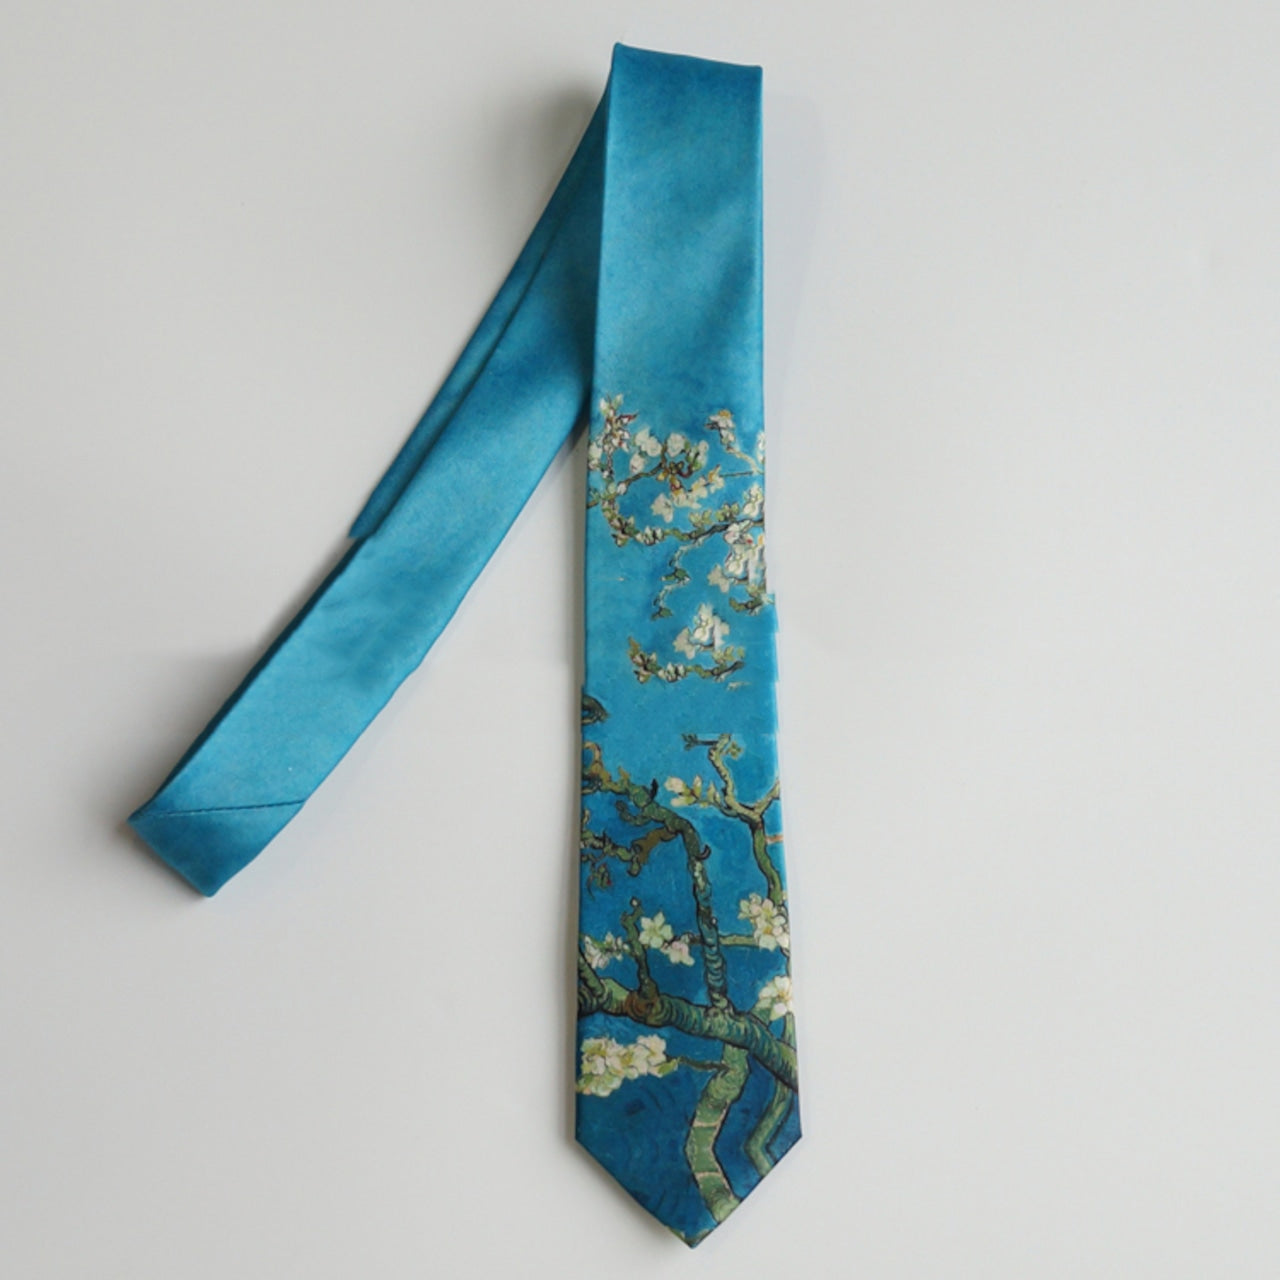 "Blooming Almond Tree Branch" Tie